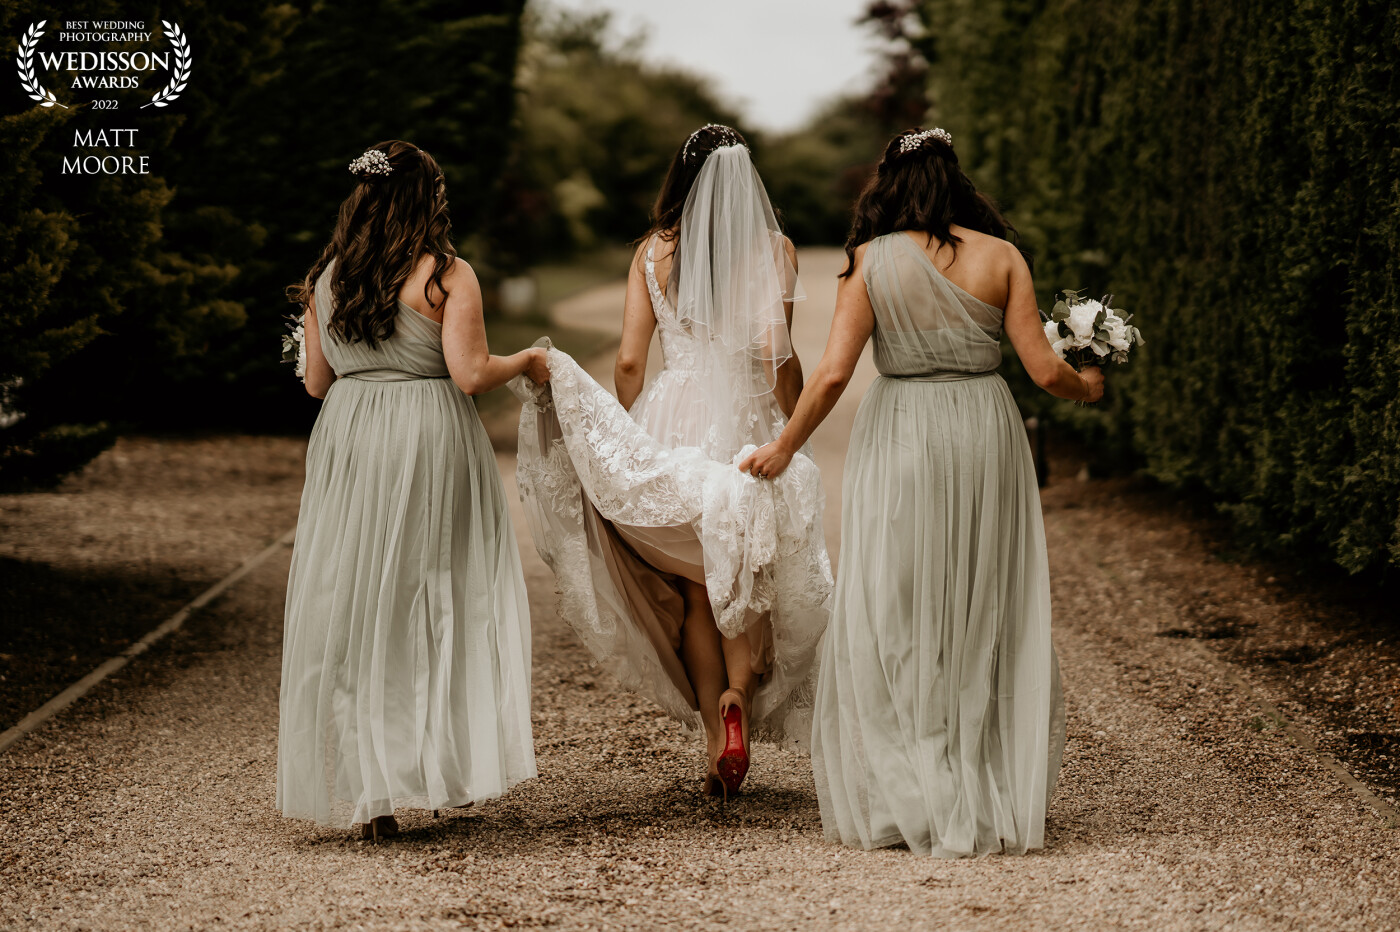 Dan and Adele's wedding at the Carriage hall in Notts was just sublime, hosted with their nearest and dearest. Drones, dancing and a lot of drinking made this a fantastic day. This shot was with Adele and her bridesmaids following a few portfolio pictures at the venue